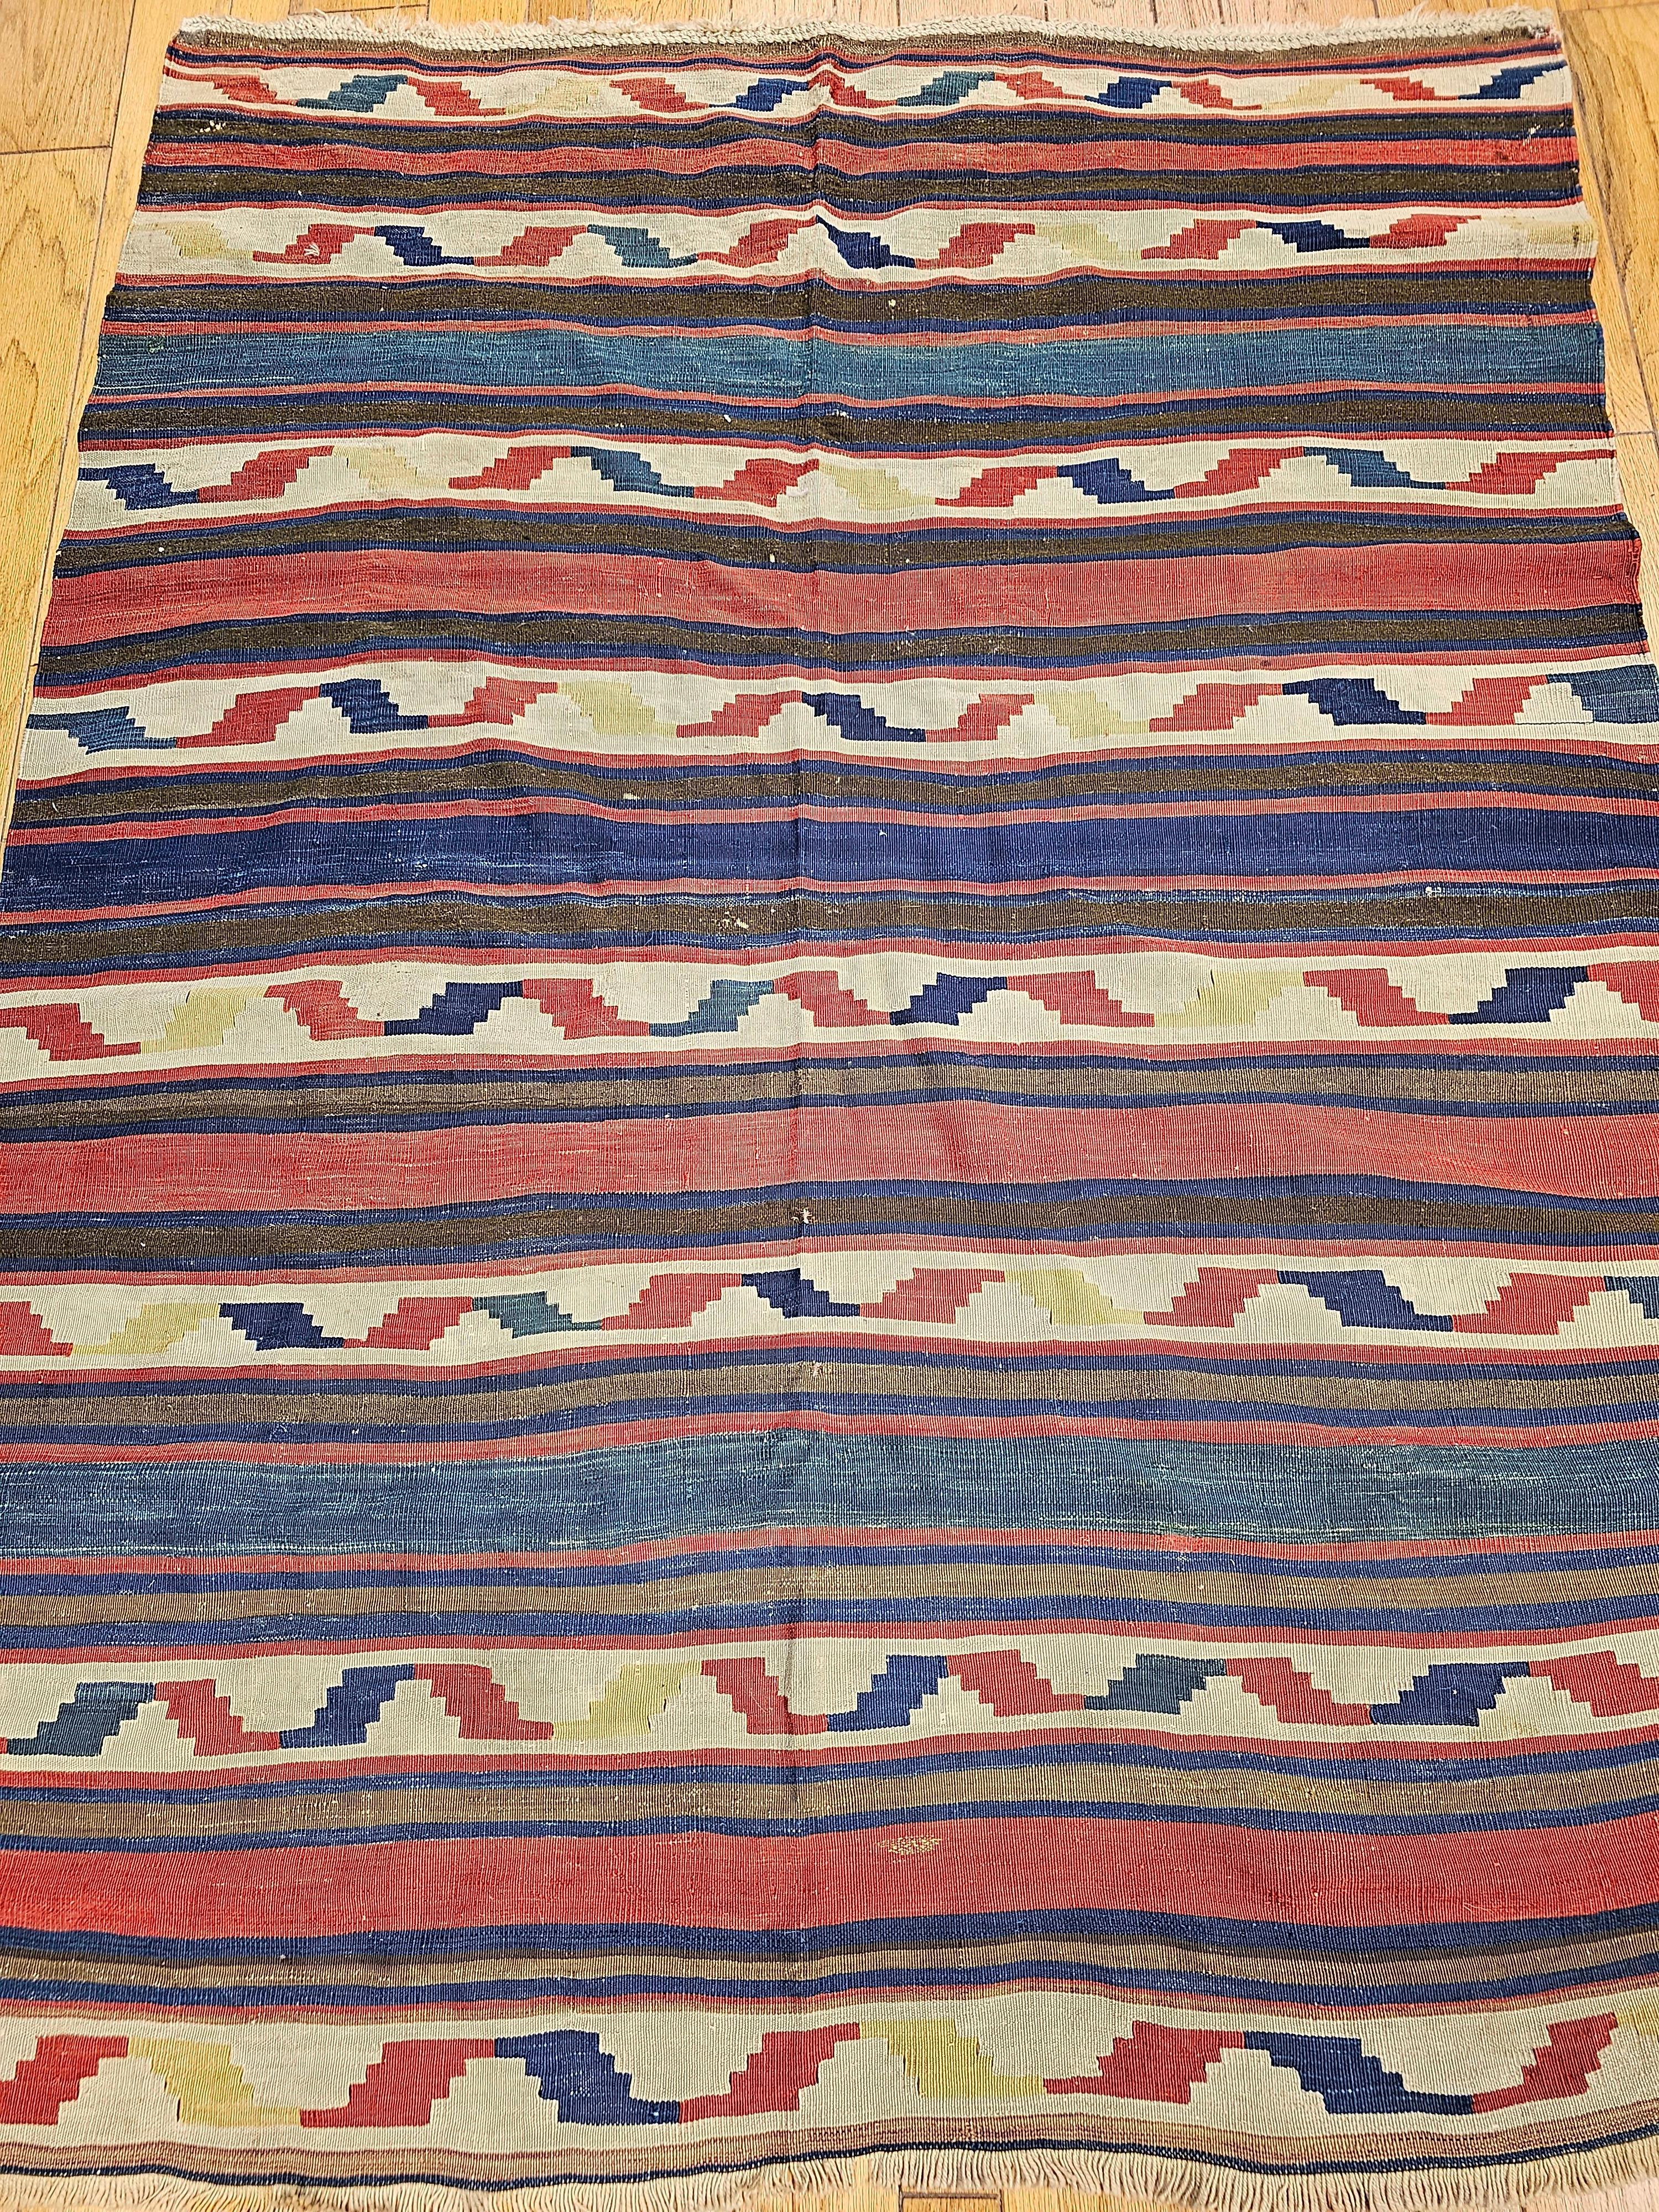  This beautiful Caucasian Kilim has the true essence of the village and tribal weaving. The Turkish Kilim has brilliant colors including abrash blue, yellow, brick red, brown, and ivory.   The design and colors in this kilim are very similar to